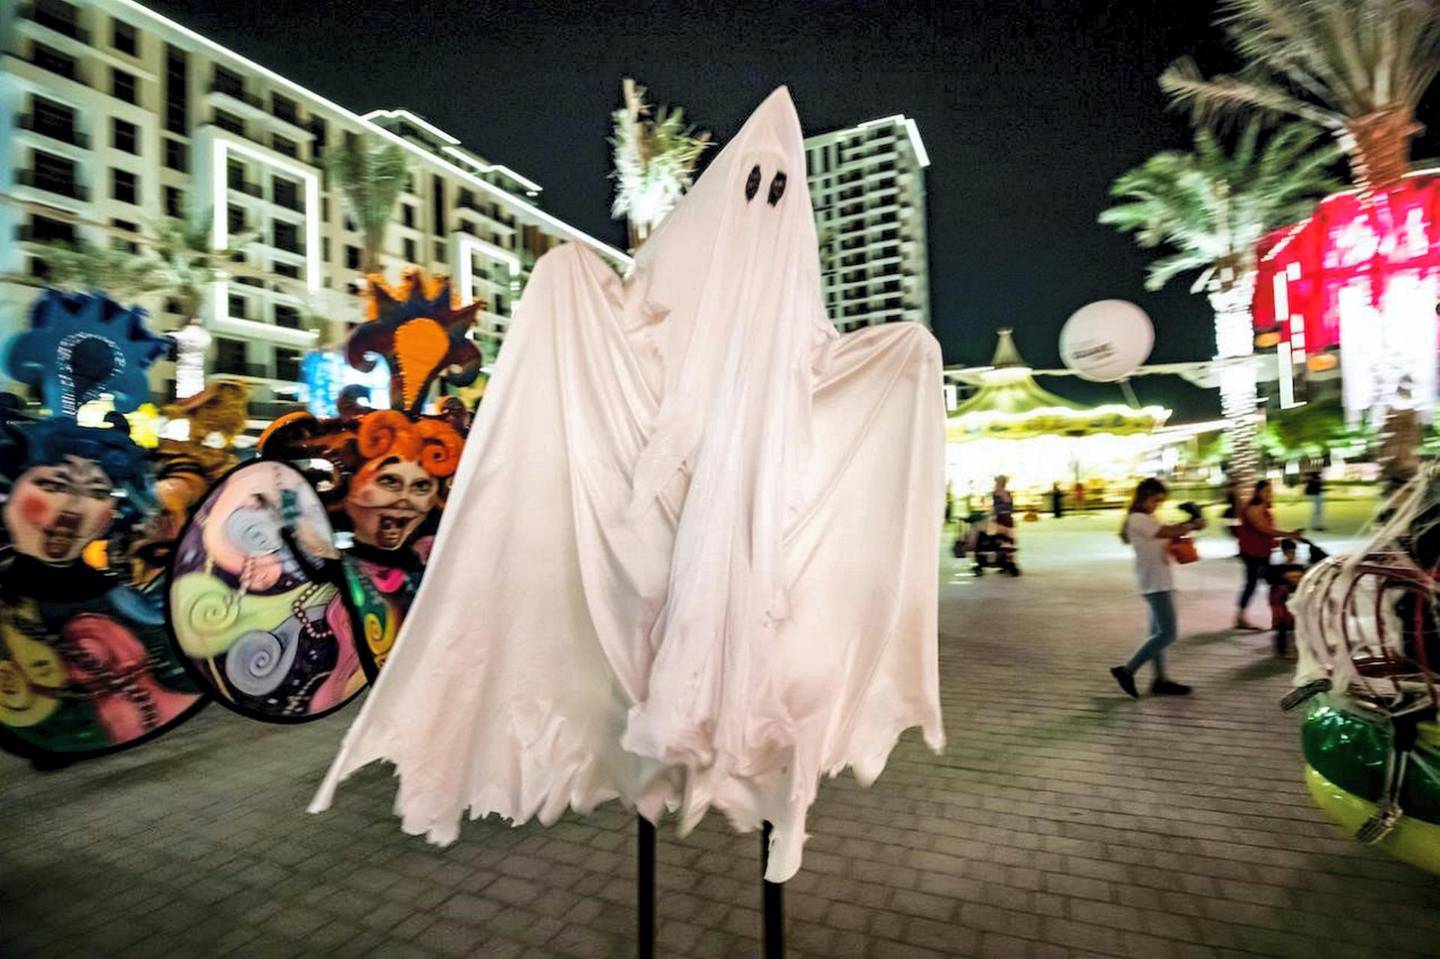 There will be jugglers, acrobats and other performers at Town Square Dubai by Nshama over the Halloween weekend. Supplied